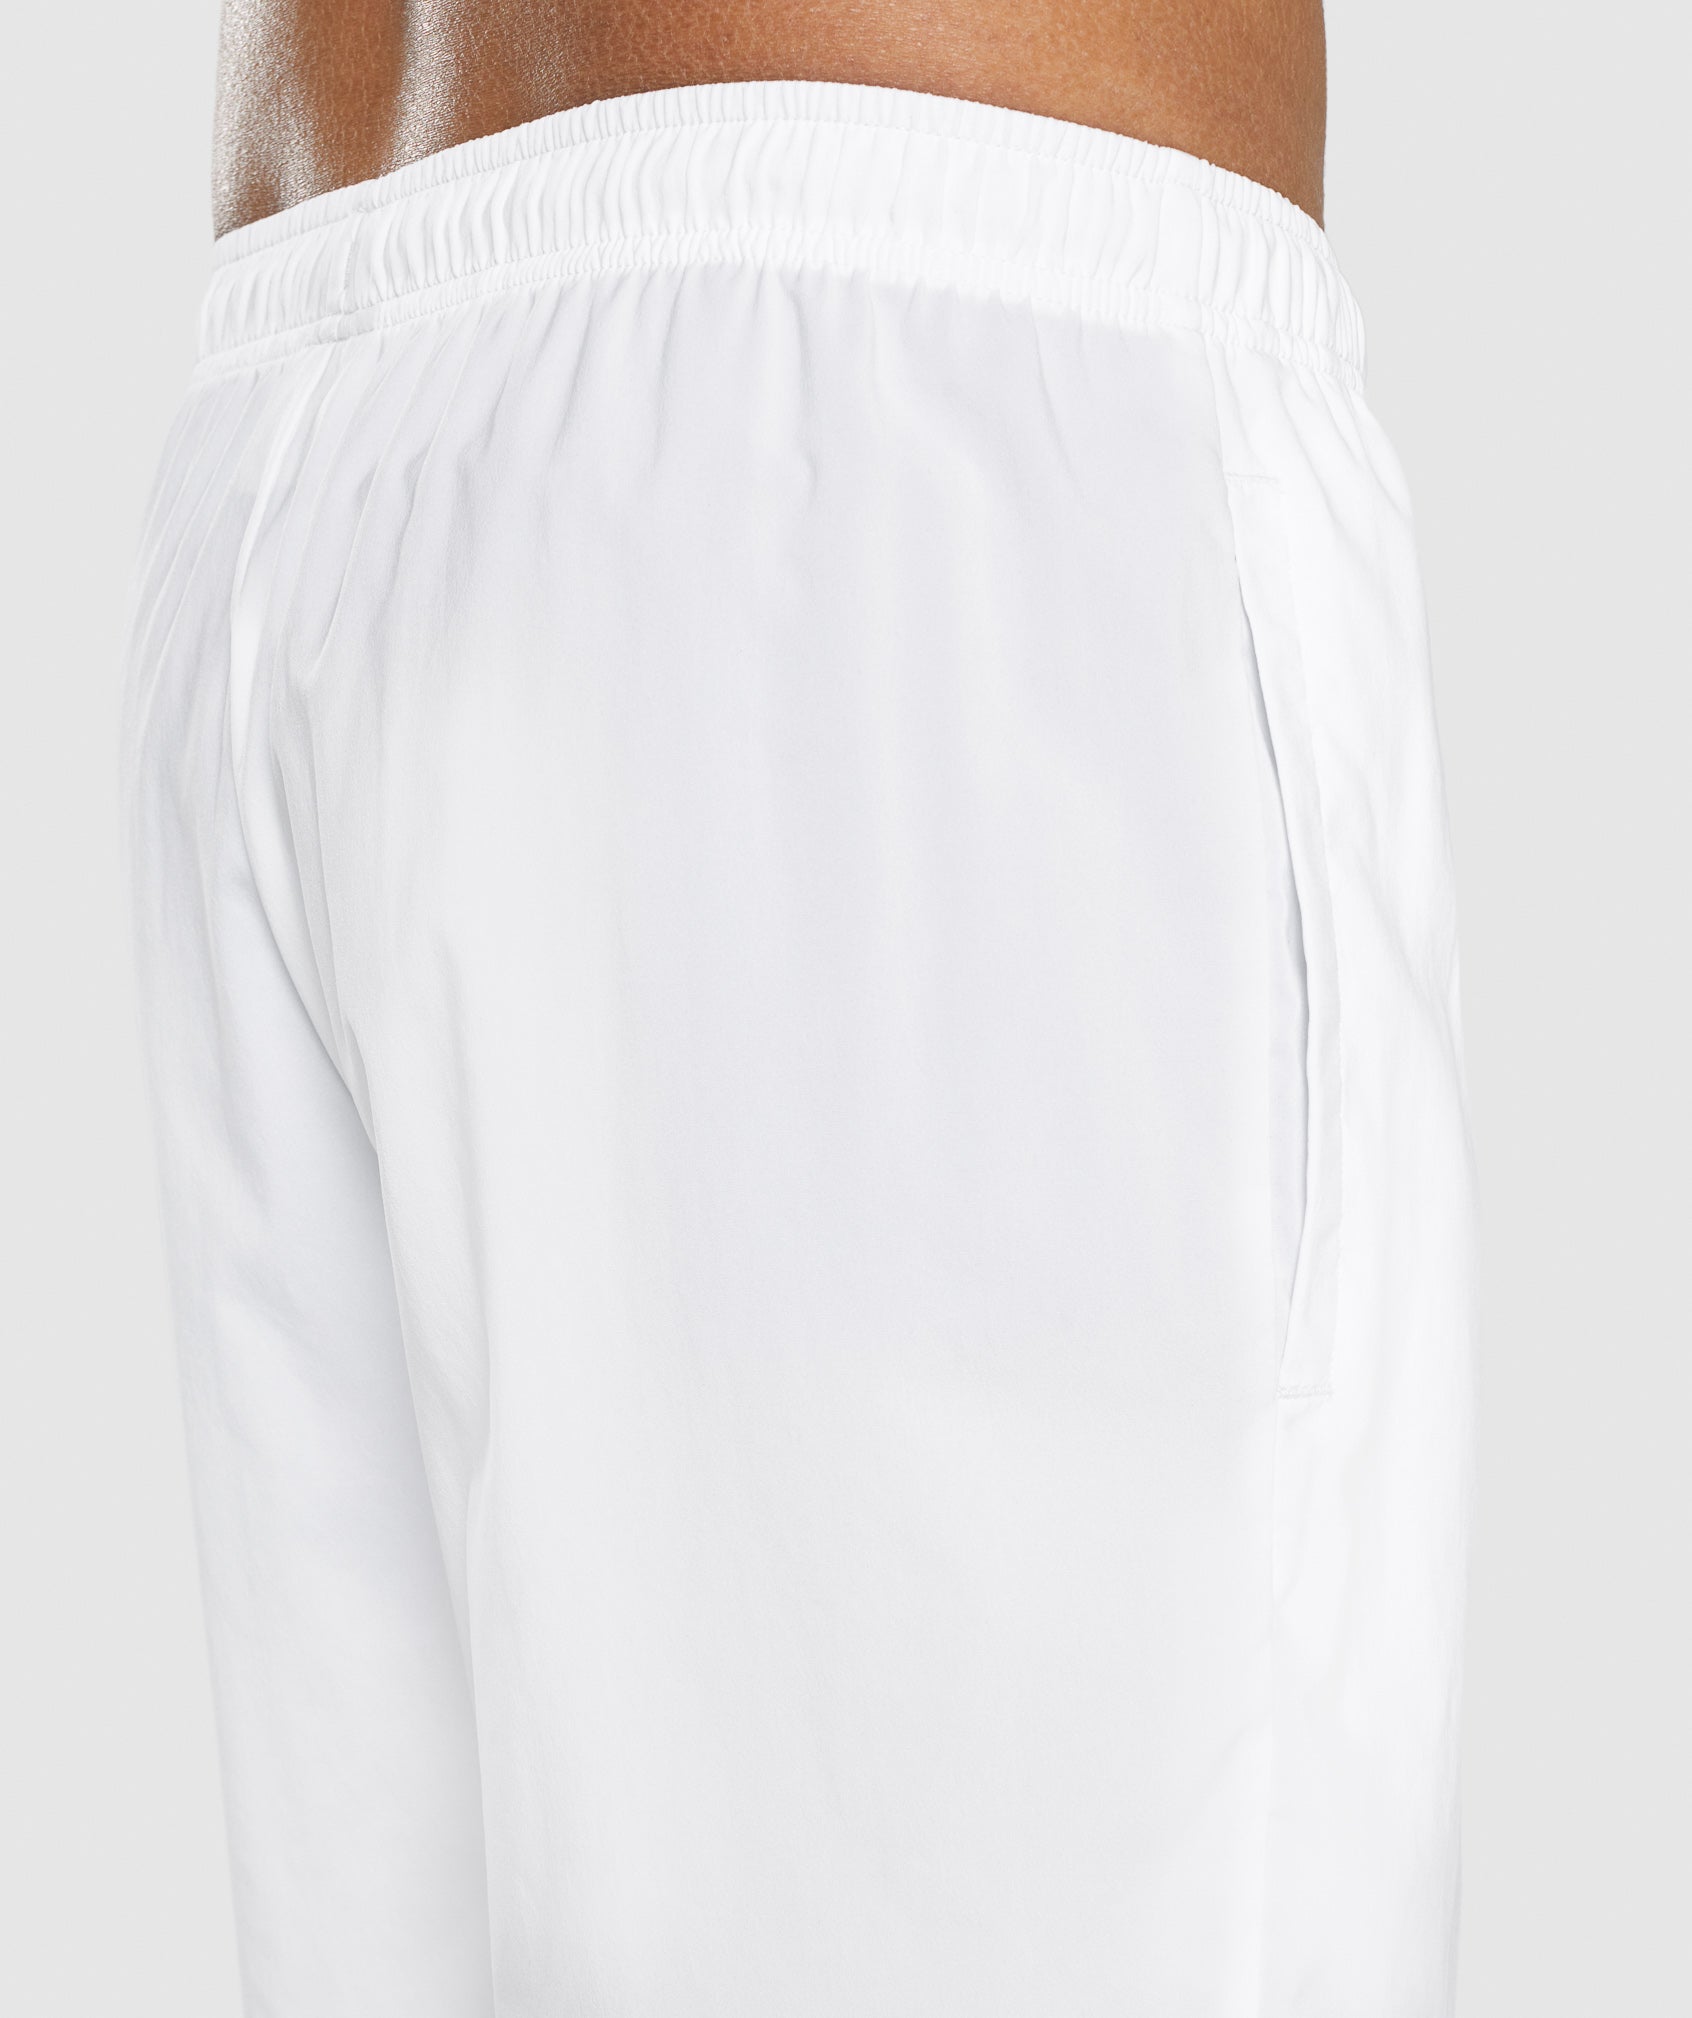 Arrival 7" Shorts in White - view 6